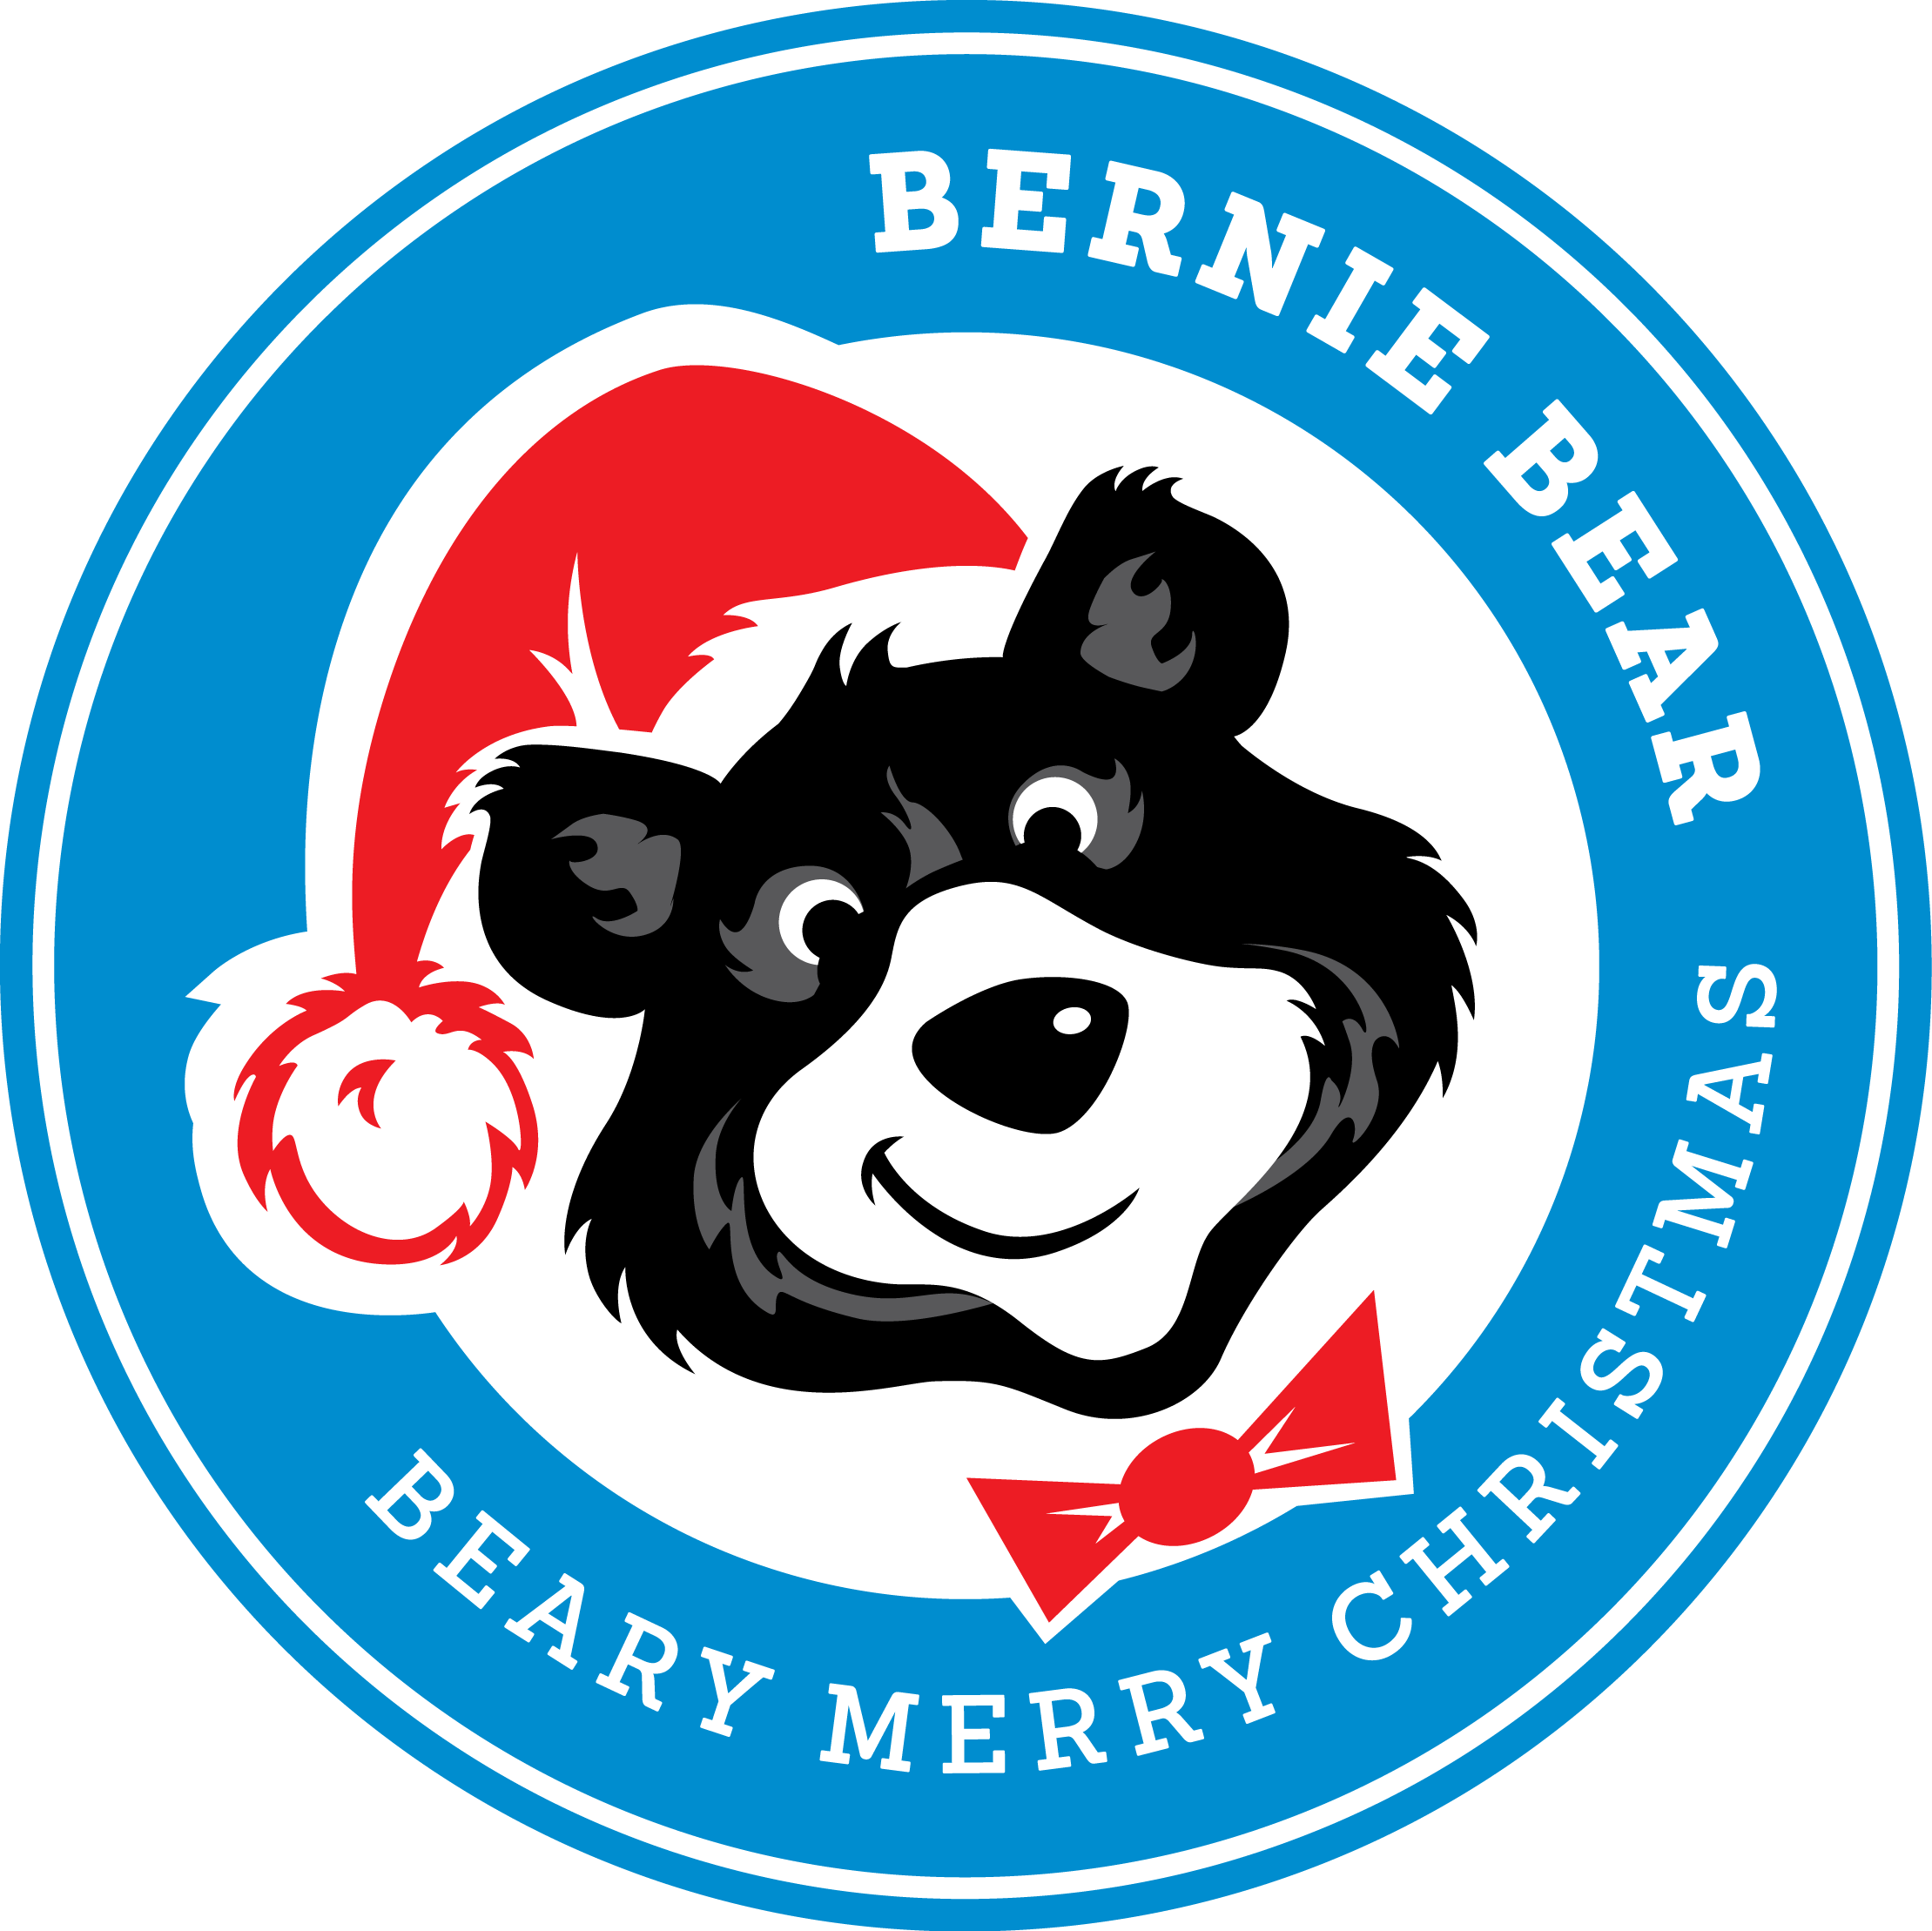 Xmass Logo - Beary Merry Christmas | Beary Merry Christmas is brought to you by ...